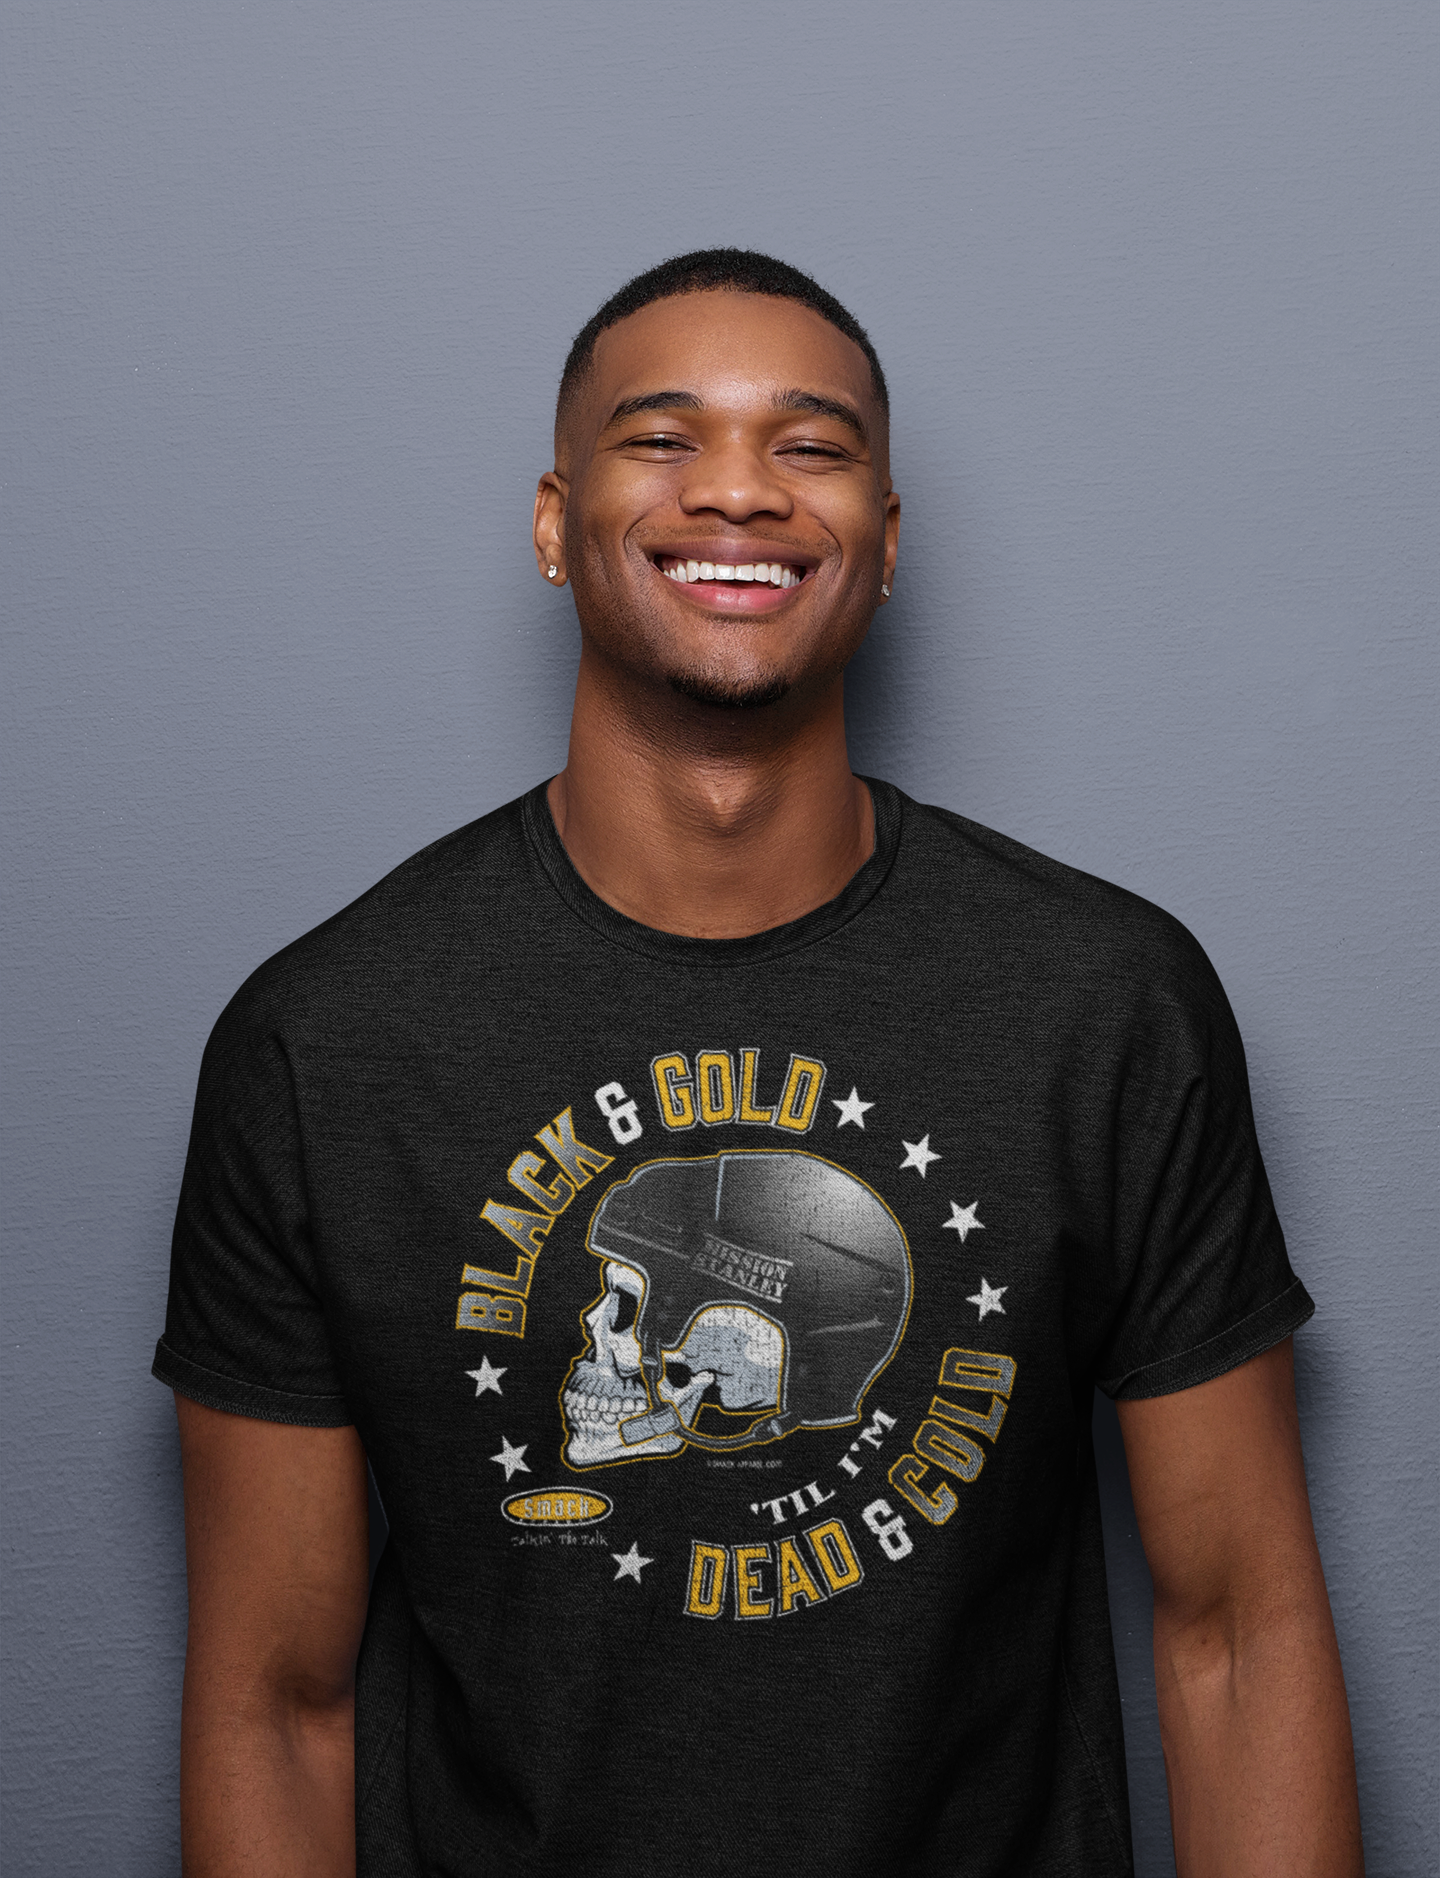 Boston Bruins playoff gear: How to buy NHL Stanley Cup playoff shirts,  hoodies and more 